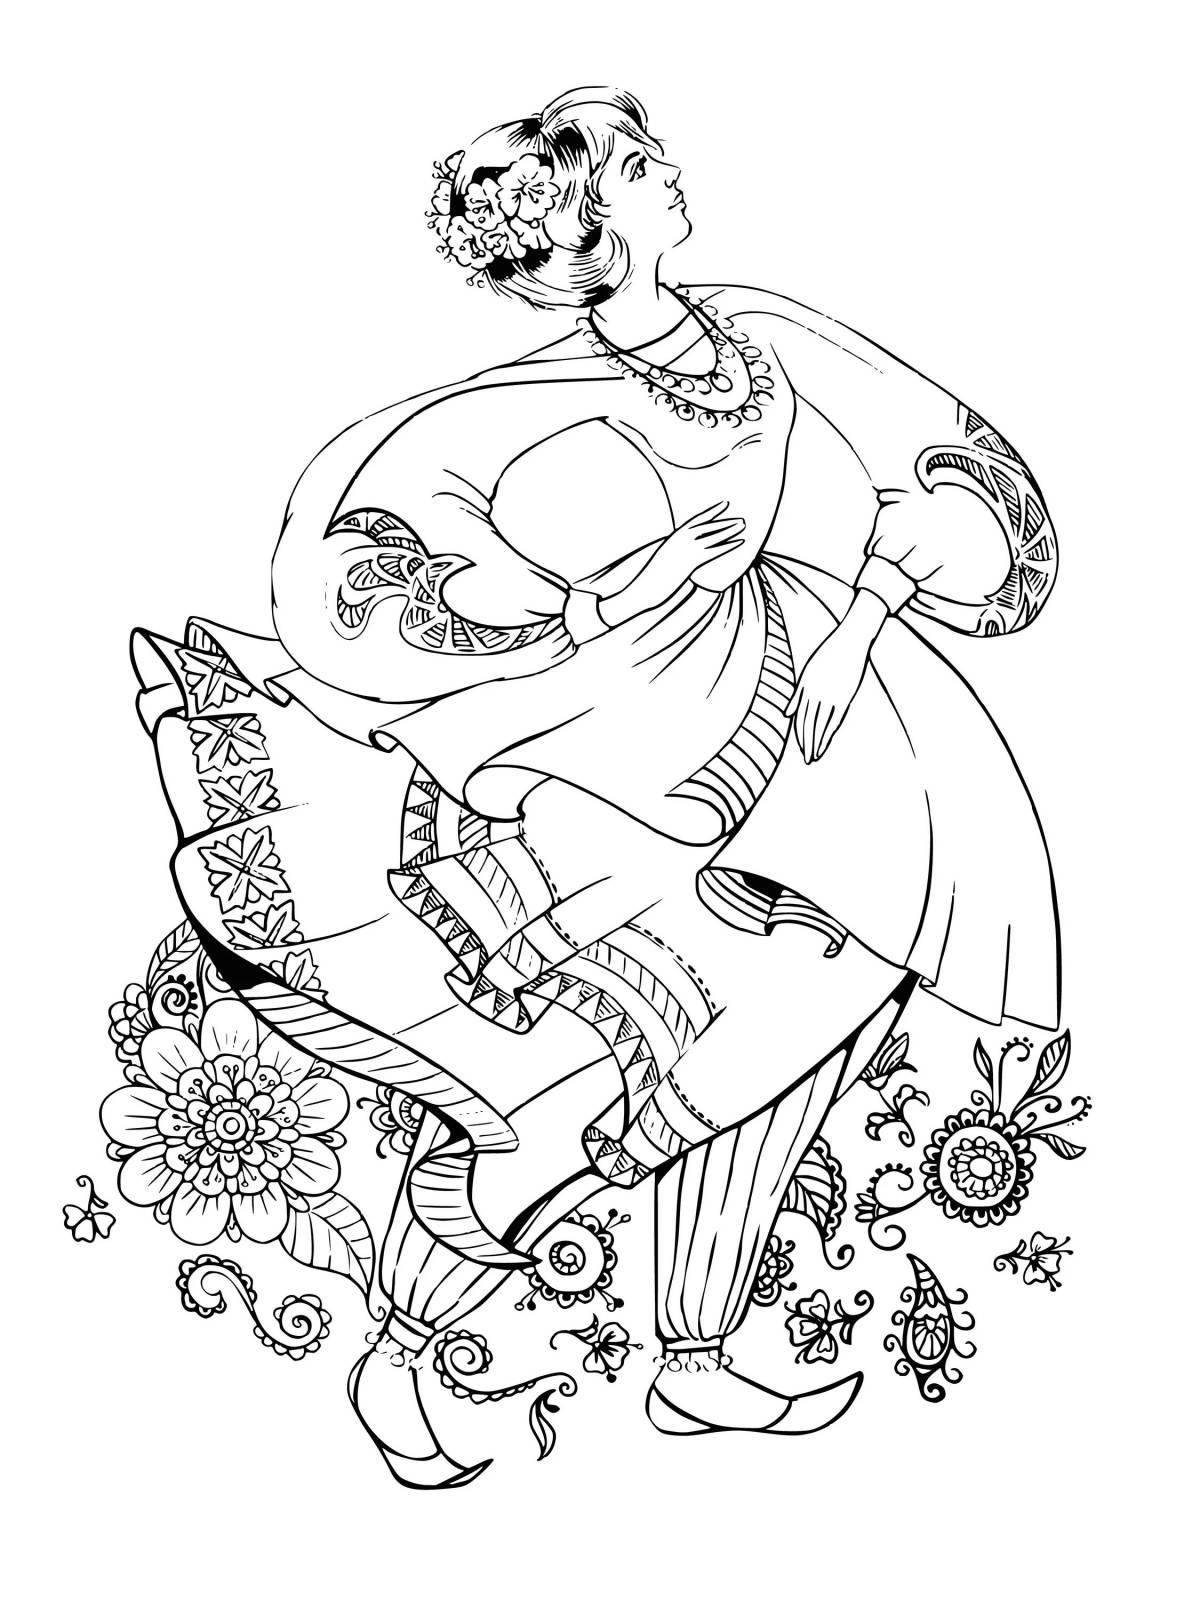 Exotic folk dance coloring page